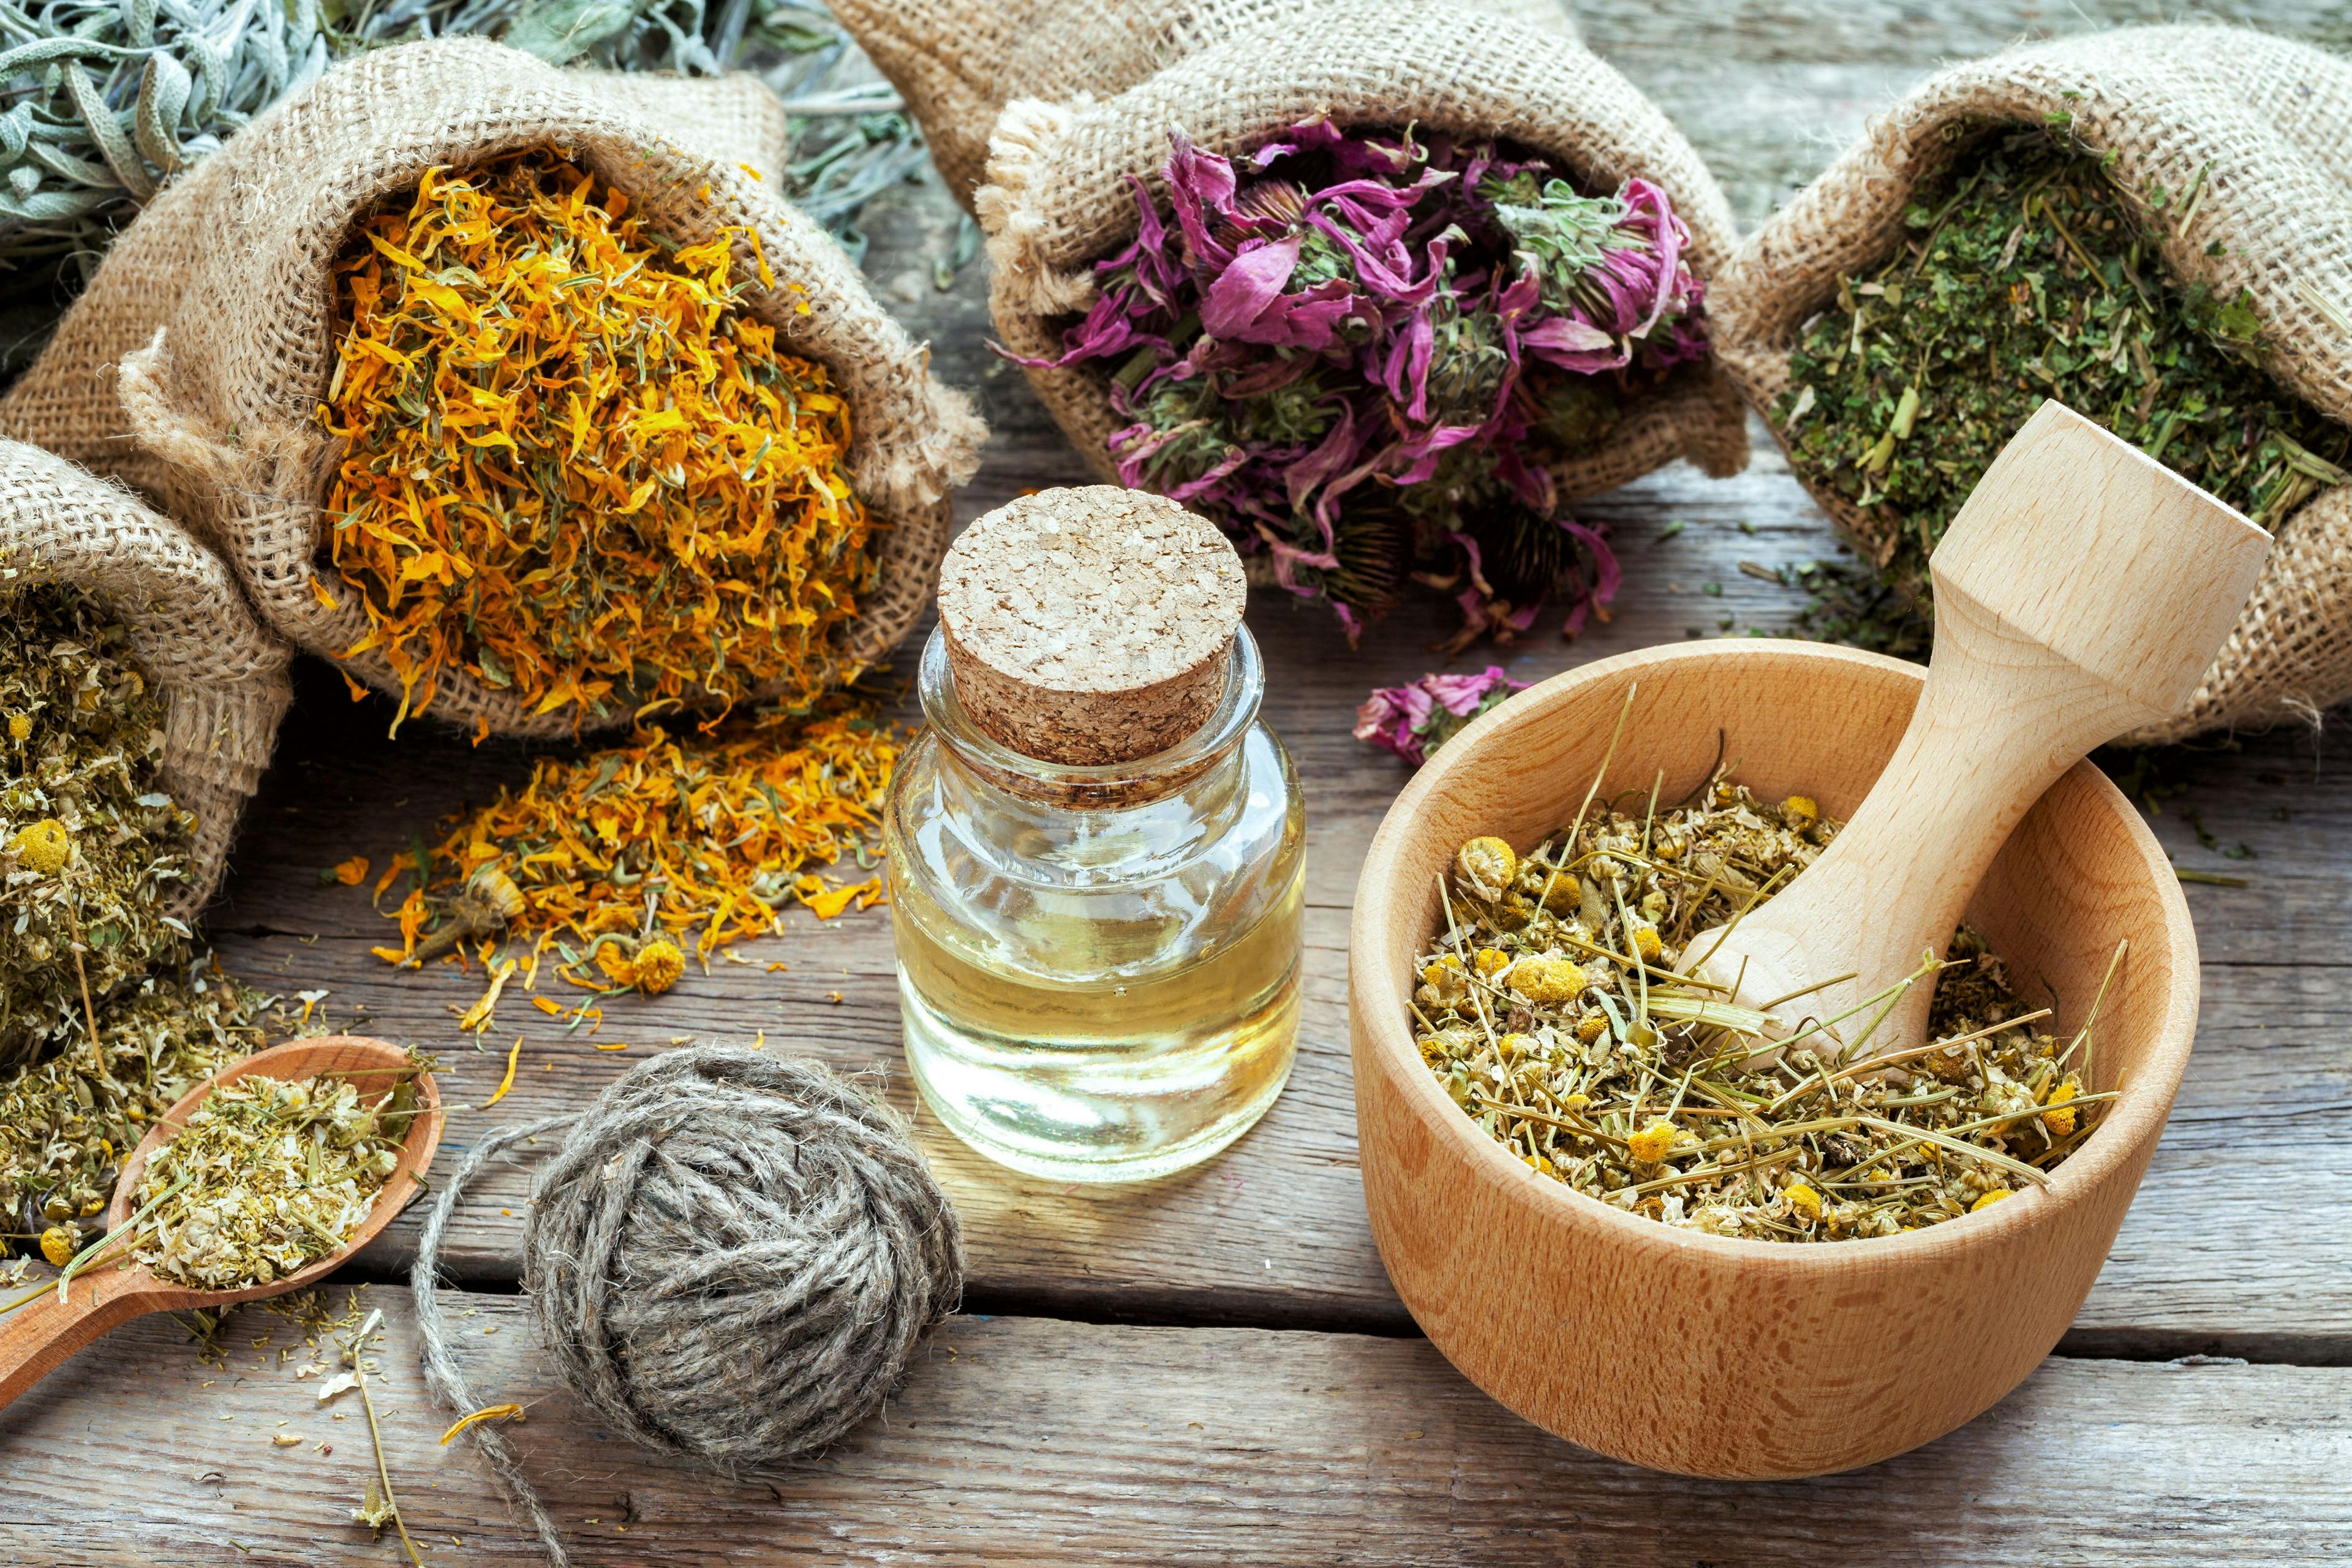 Healing herbs in hessian bags, mortar with chamomile and essenti | Image Credit: © chamillew - stock.adobe.com